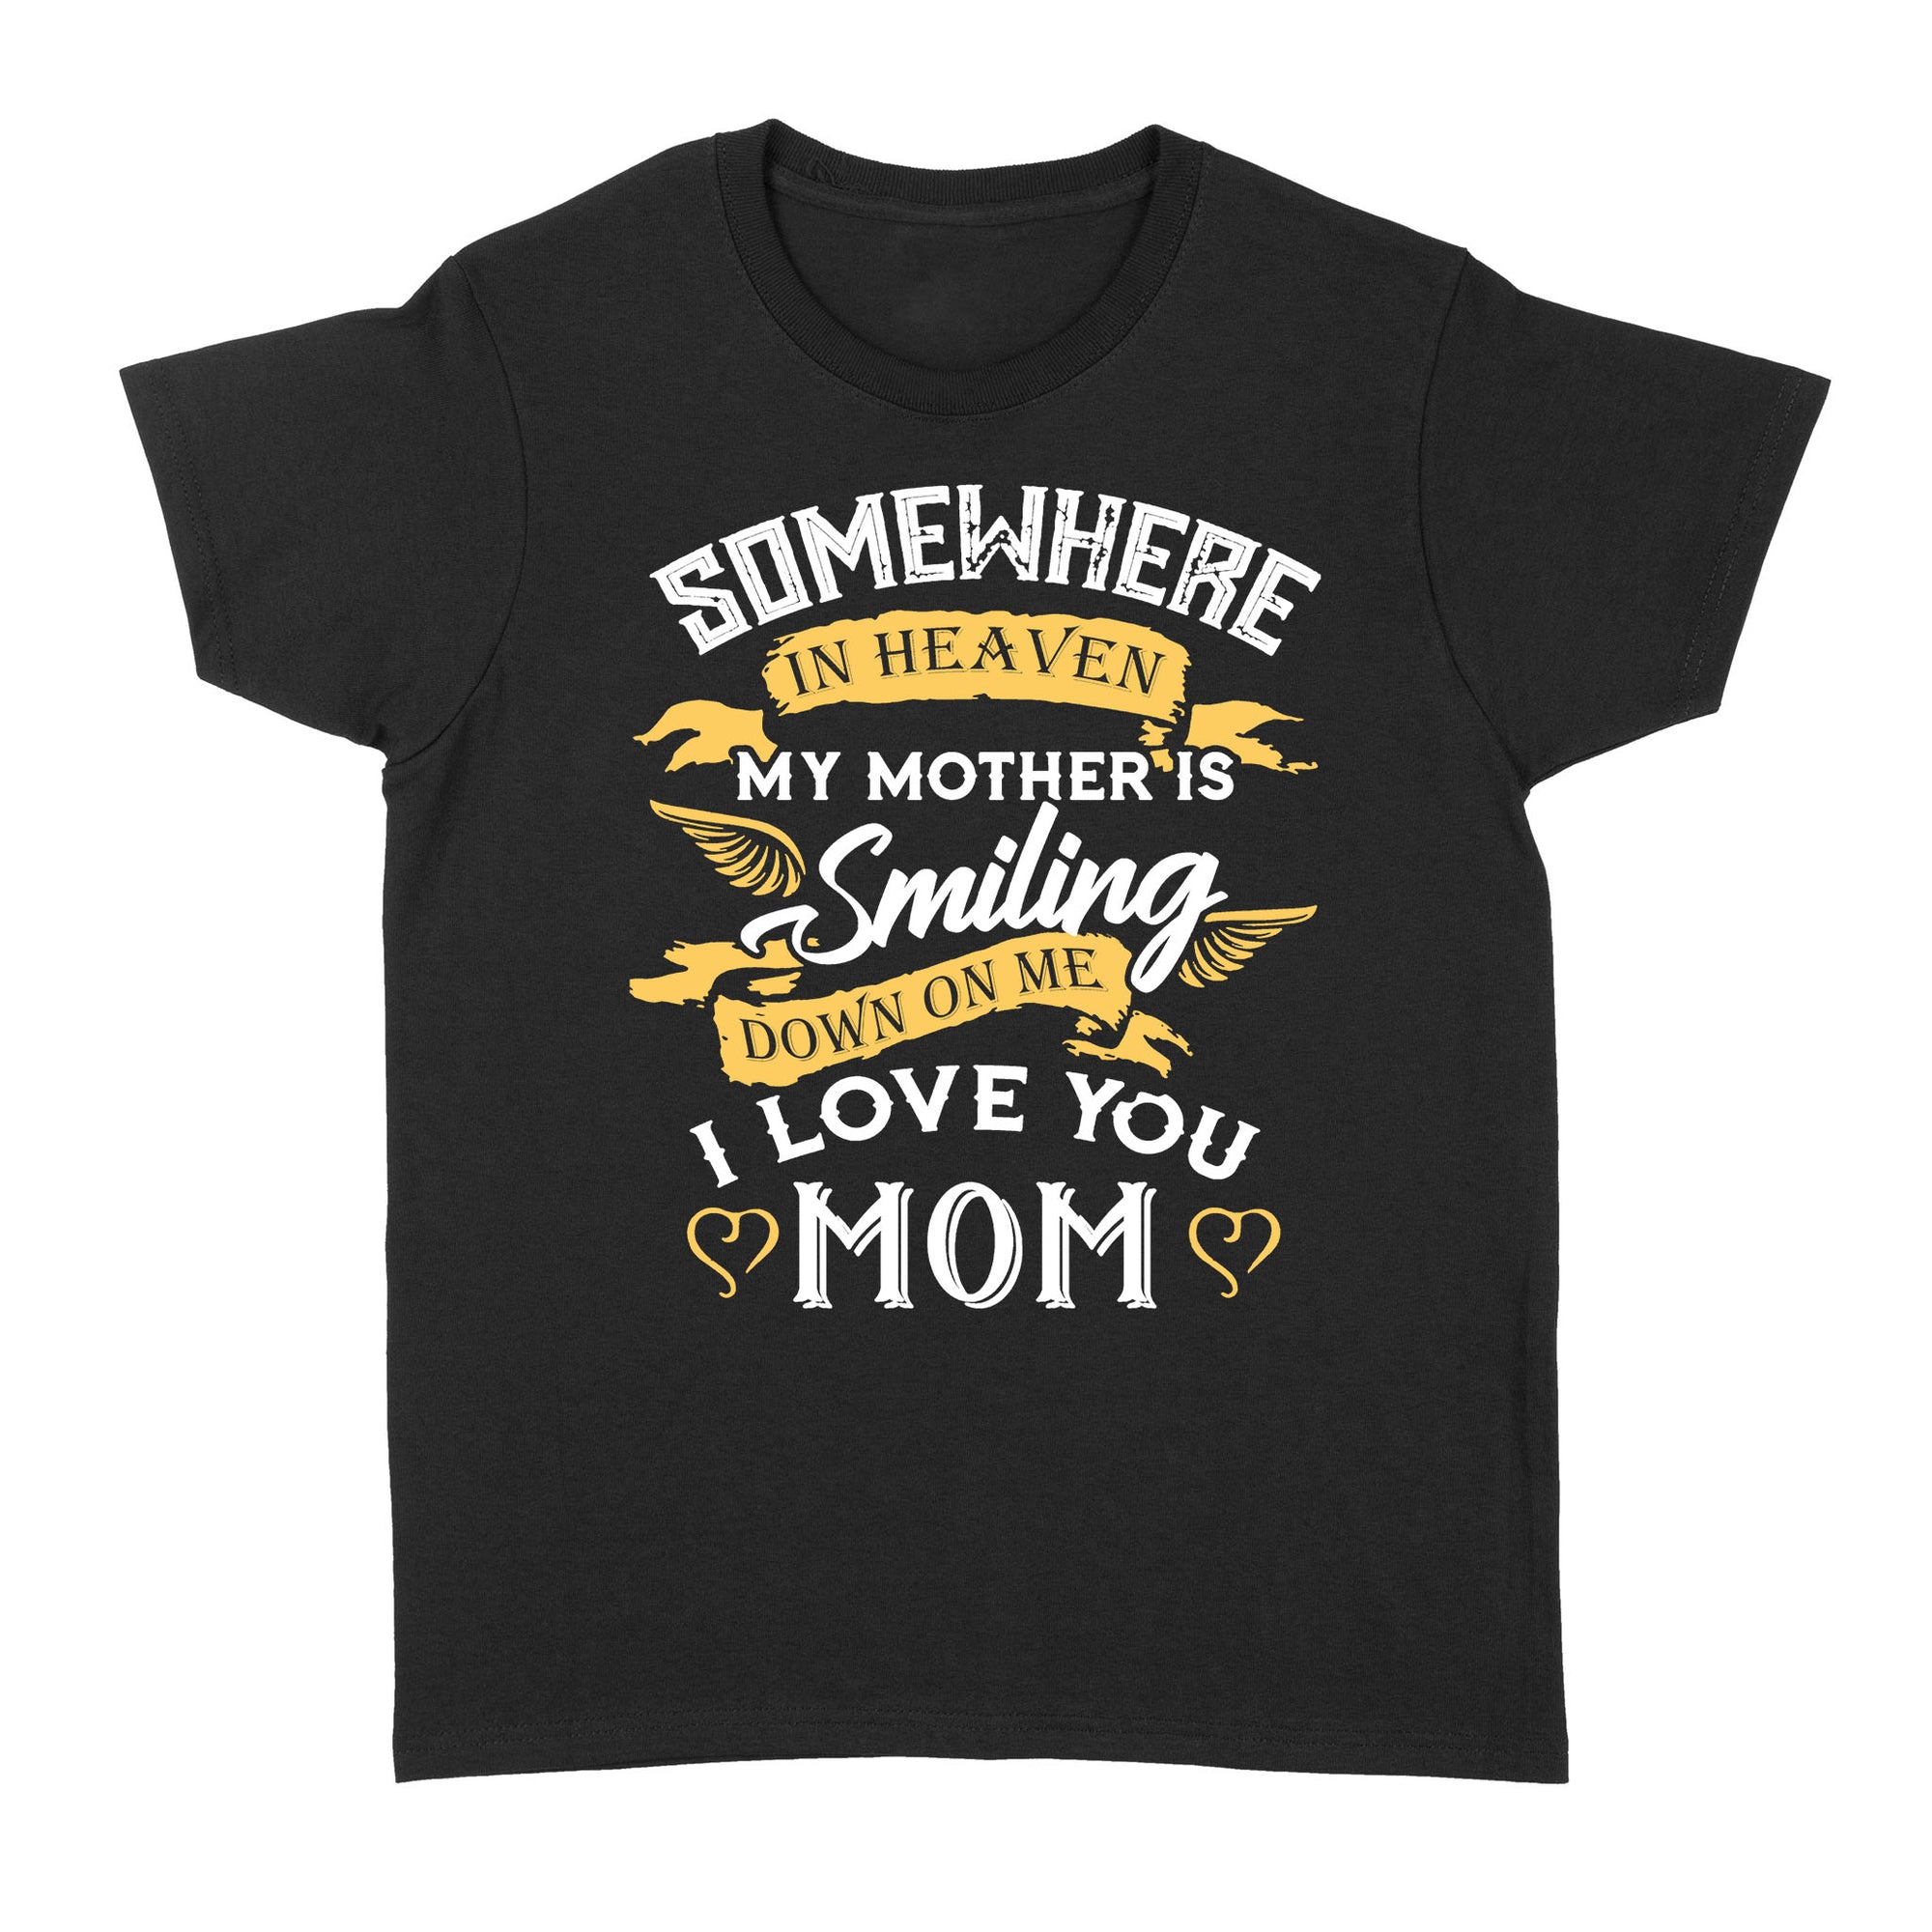 Gift Ideas for Daughter Somewhere In Heaven My Mother Is Smiling Down On Me I Love You Mom - Standard Women's T-shirt